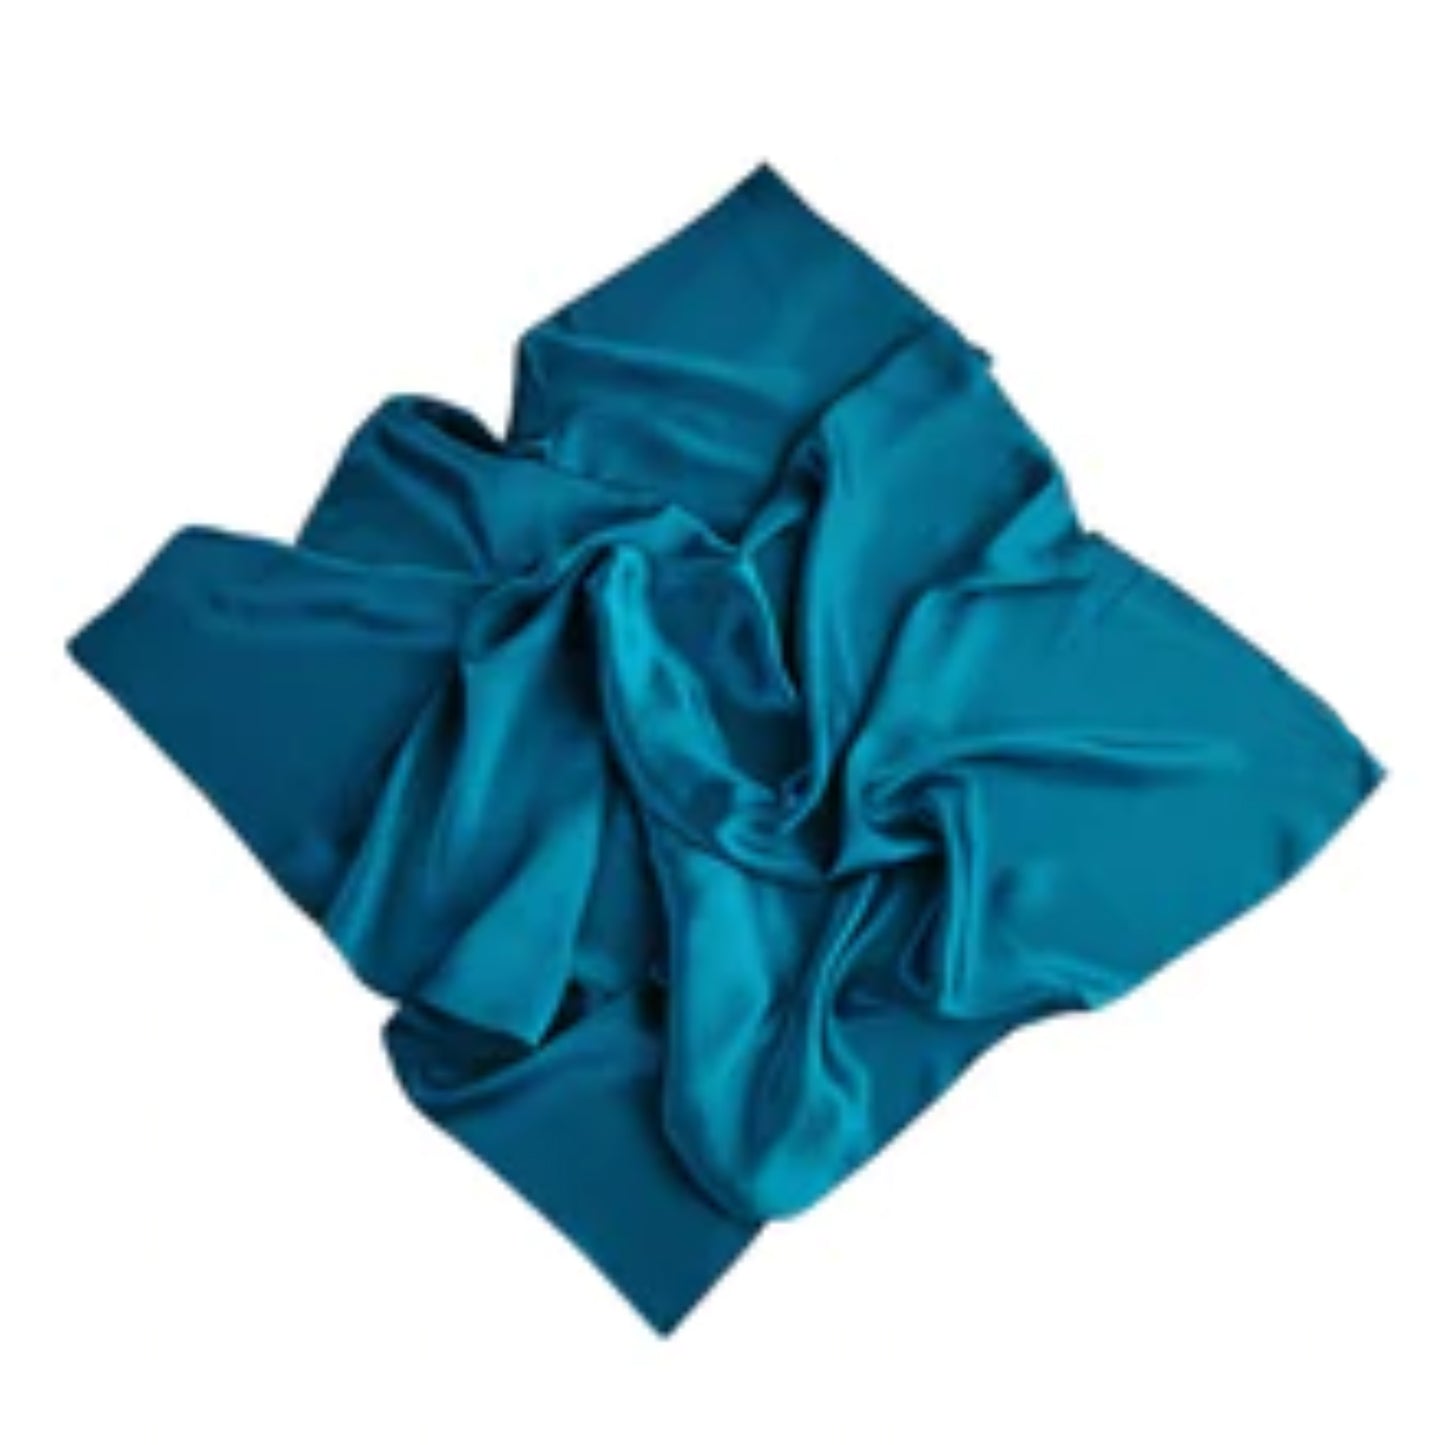 sleep well mulberry silk square hair scarf 16 momme 87cm - light peacock flat image